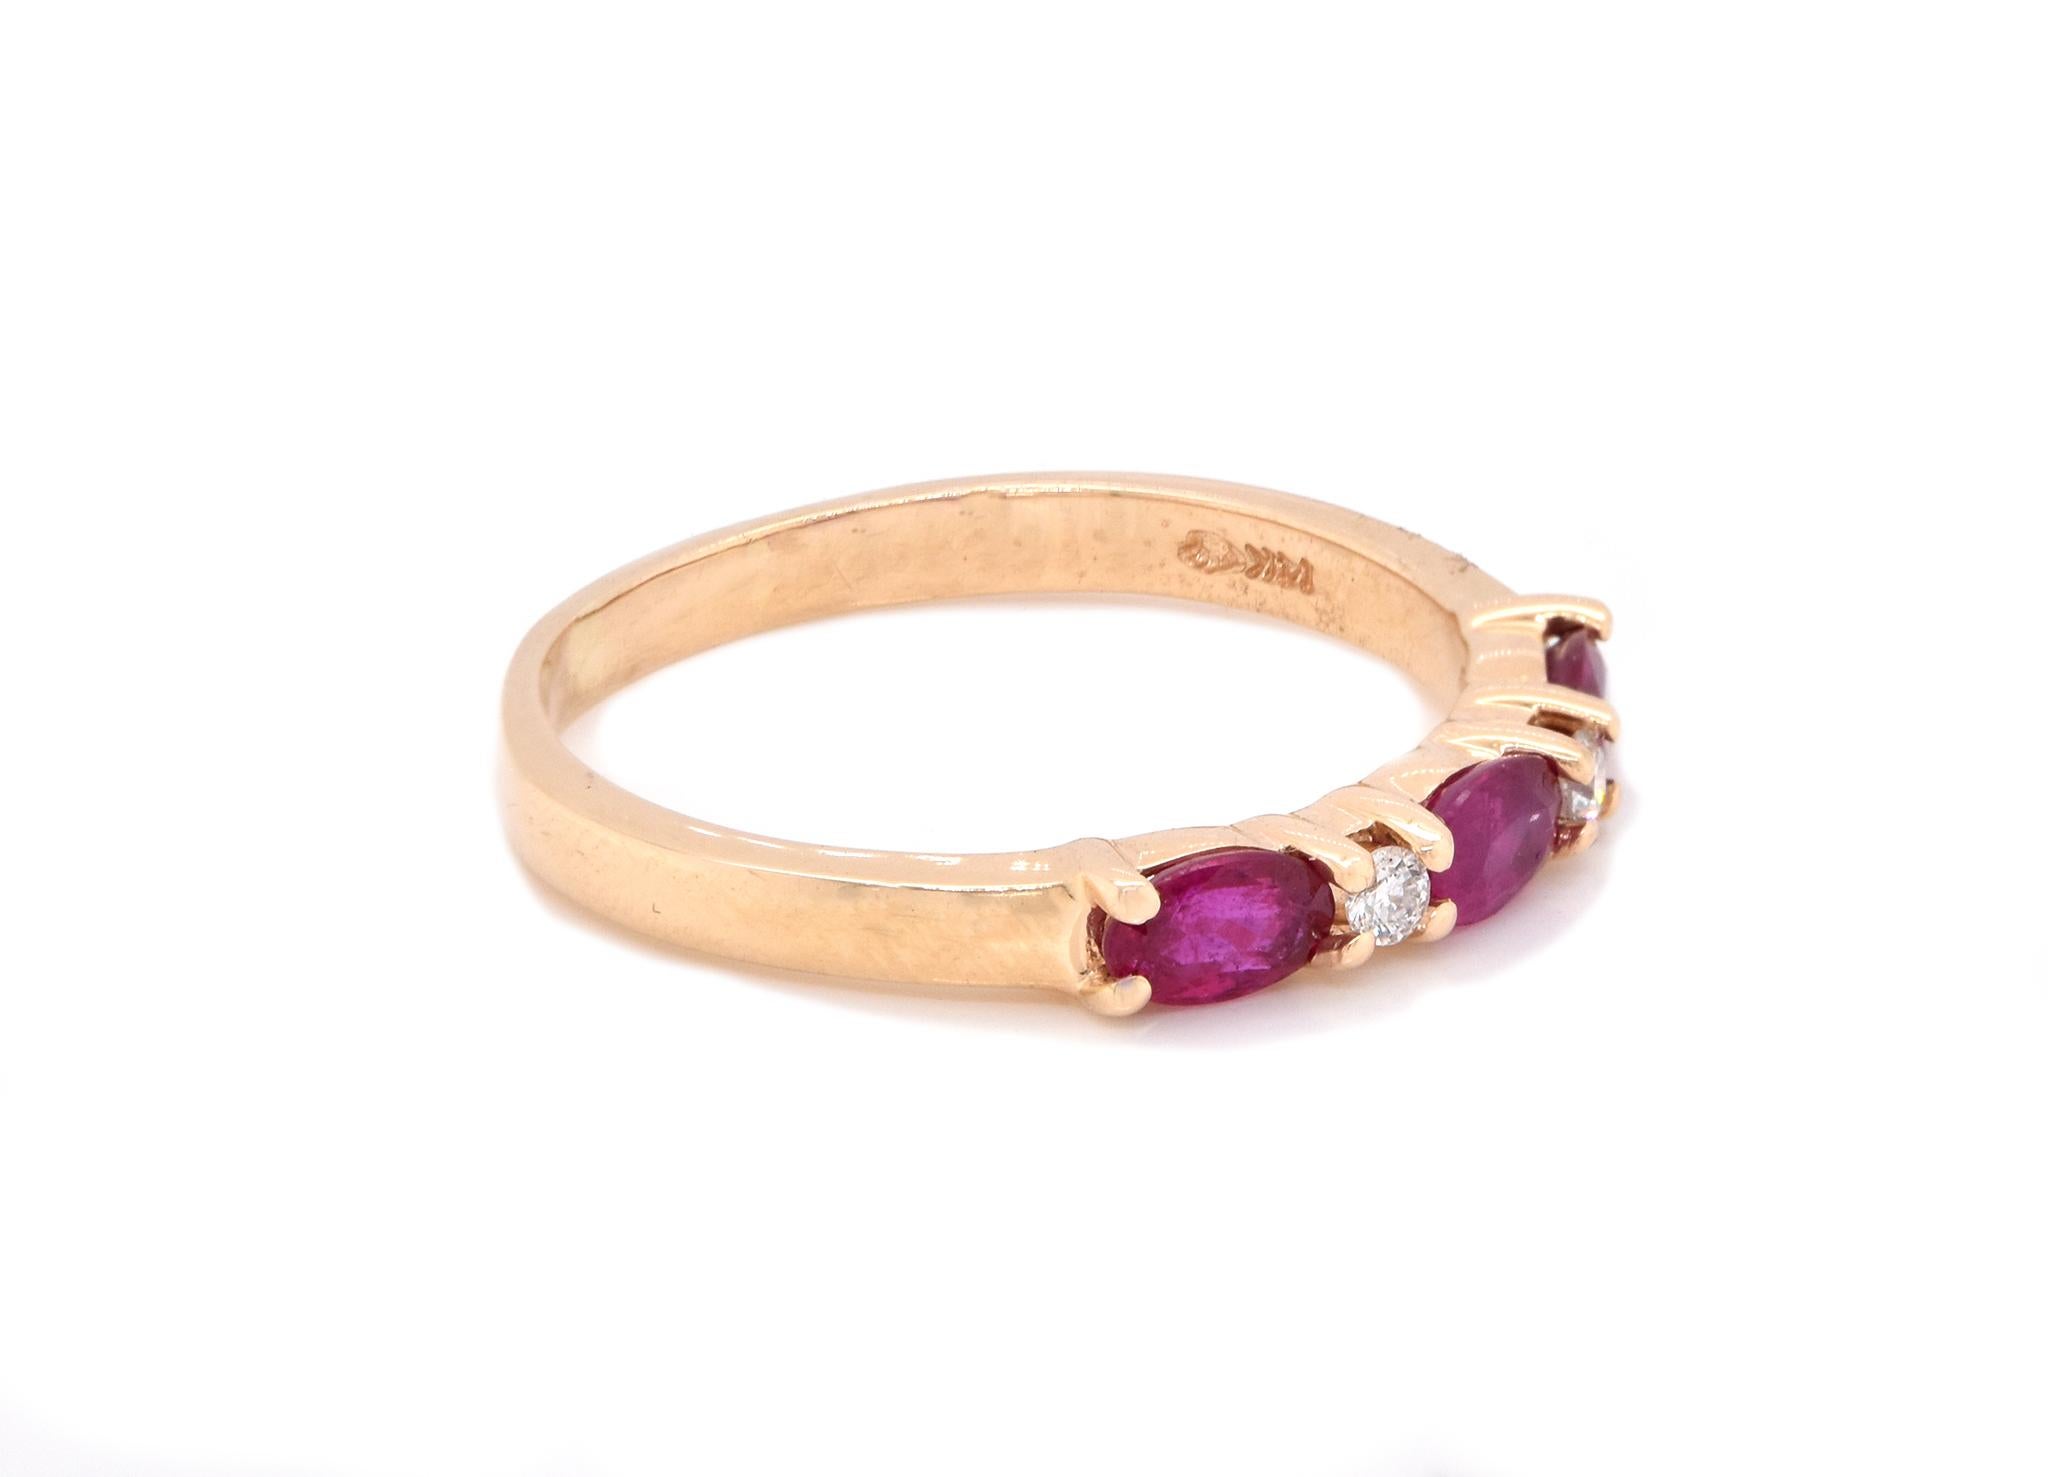 Material: 14K yellow gold
Diamond: 2 round cut = .06ttw
Color: G
Clarity: SI1
Ruby: 3 oval cut = .96ct
Ring Size: 9.25 (please allow up to 2 additional business days for sizing requests)
Dimensions: ring top measures 3.21mm wide
Weight: 2.98 grams
